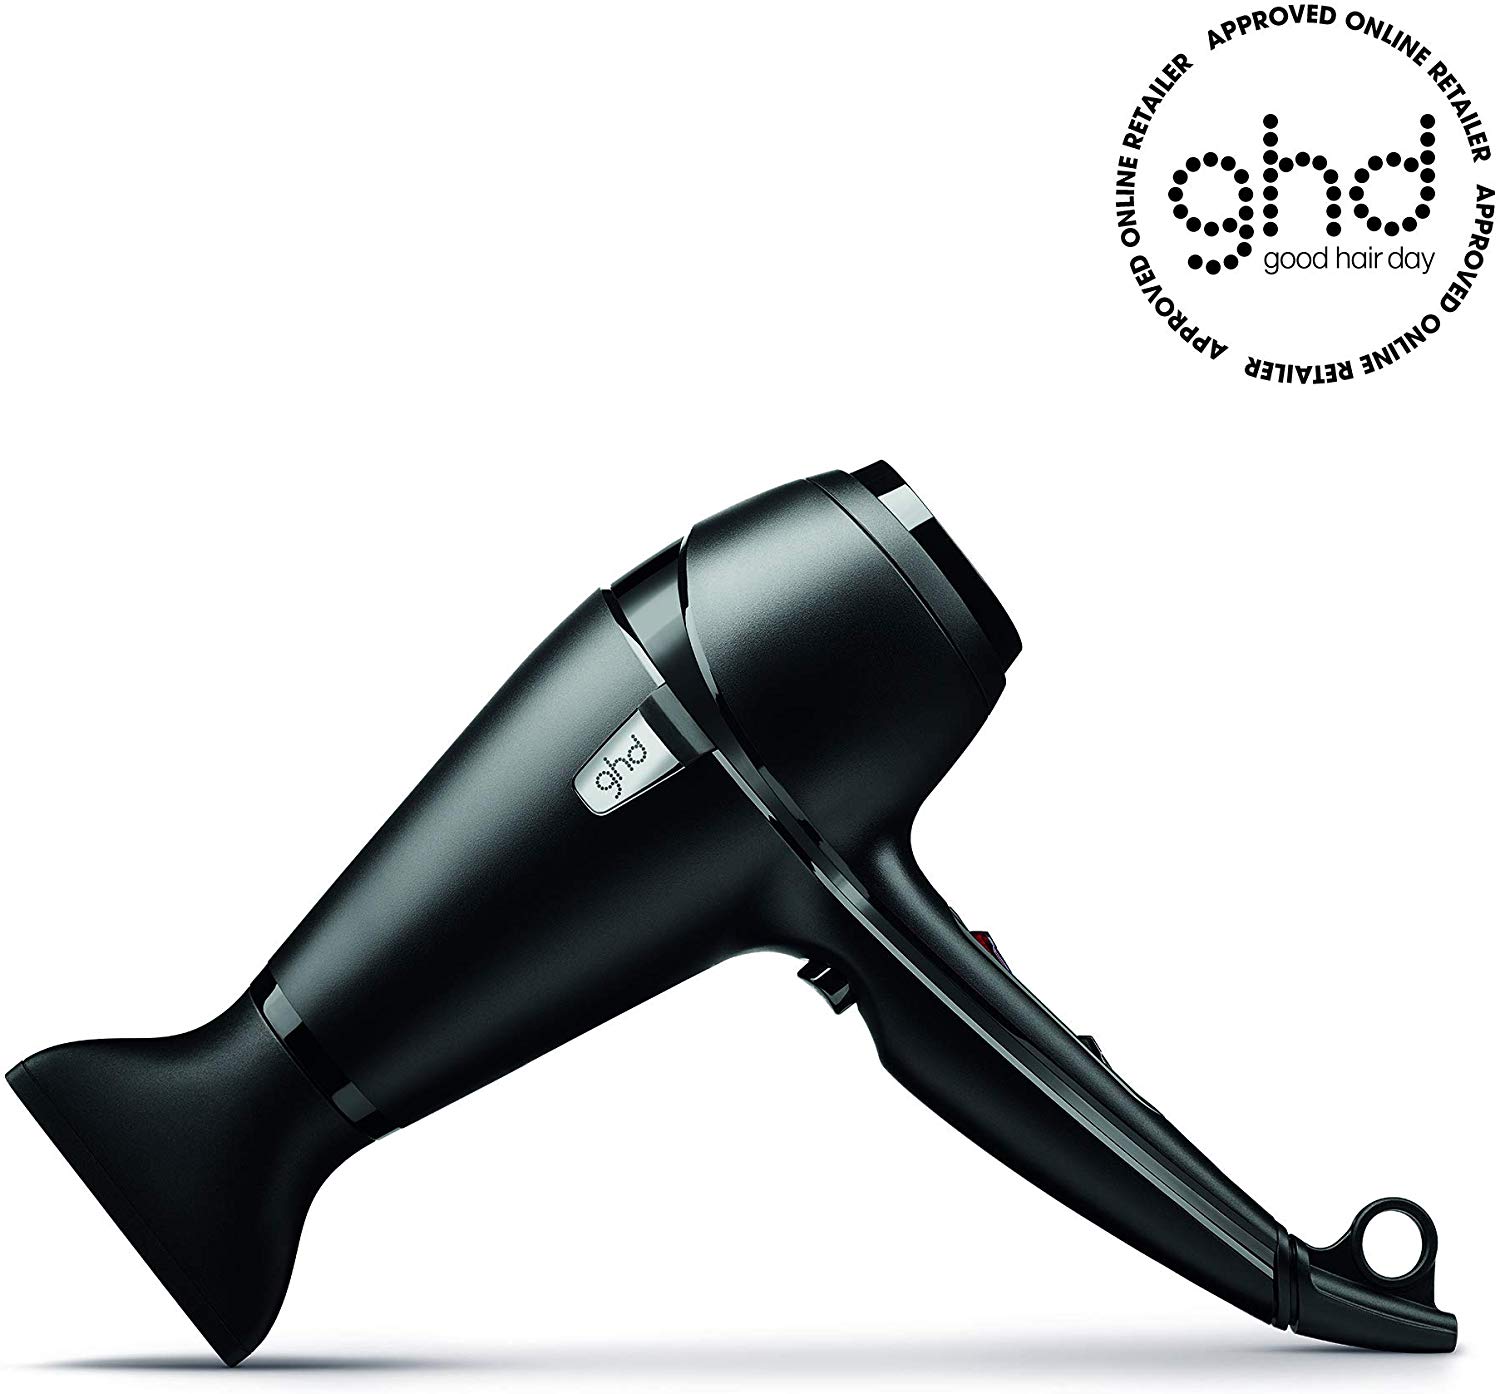 Image of the black GHD Hair Dryer